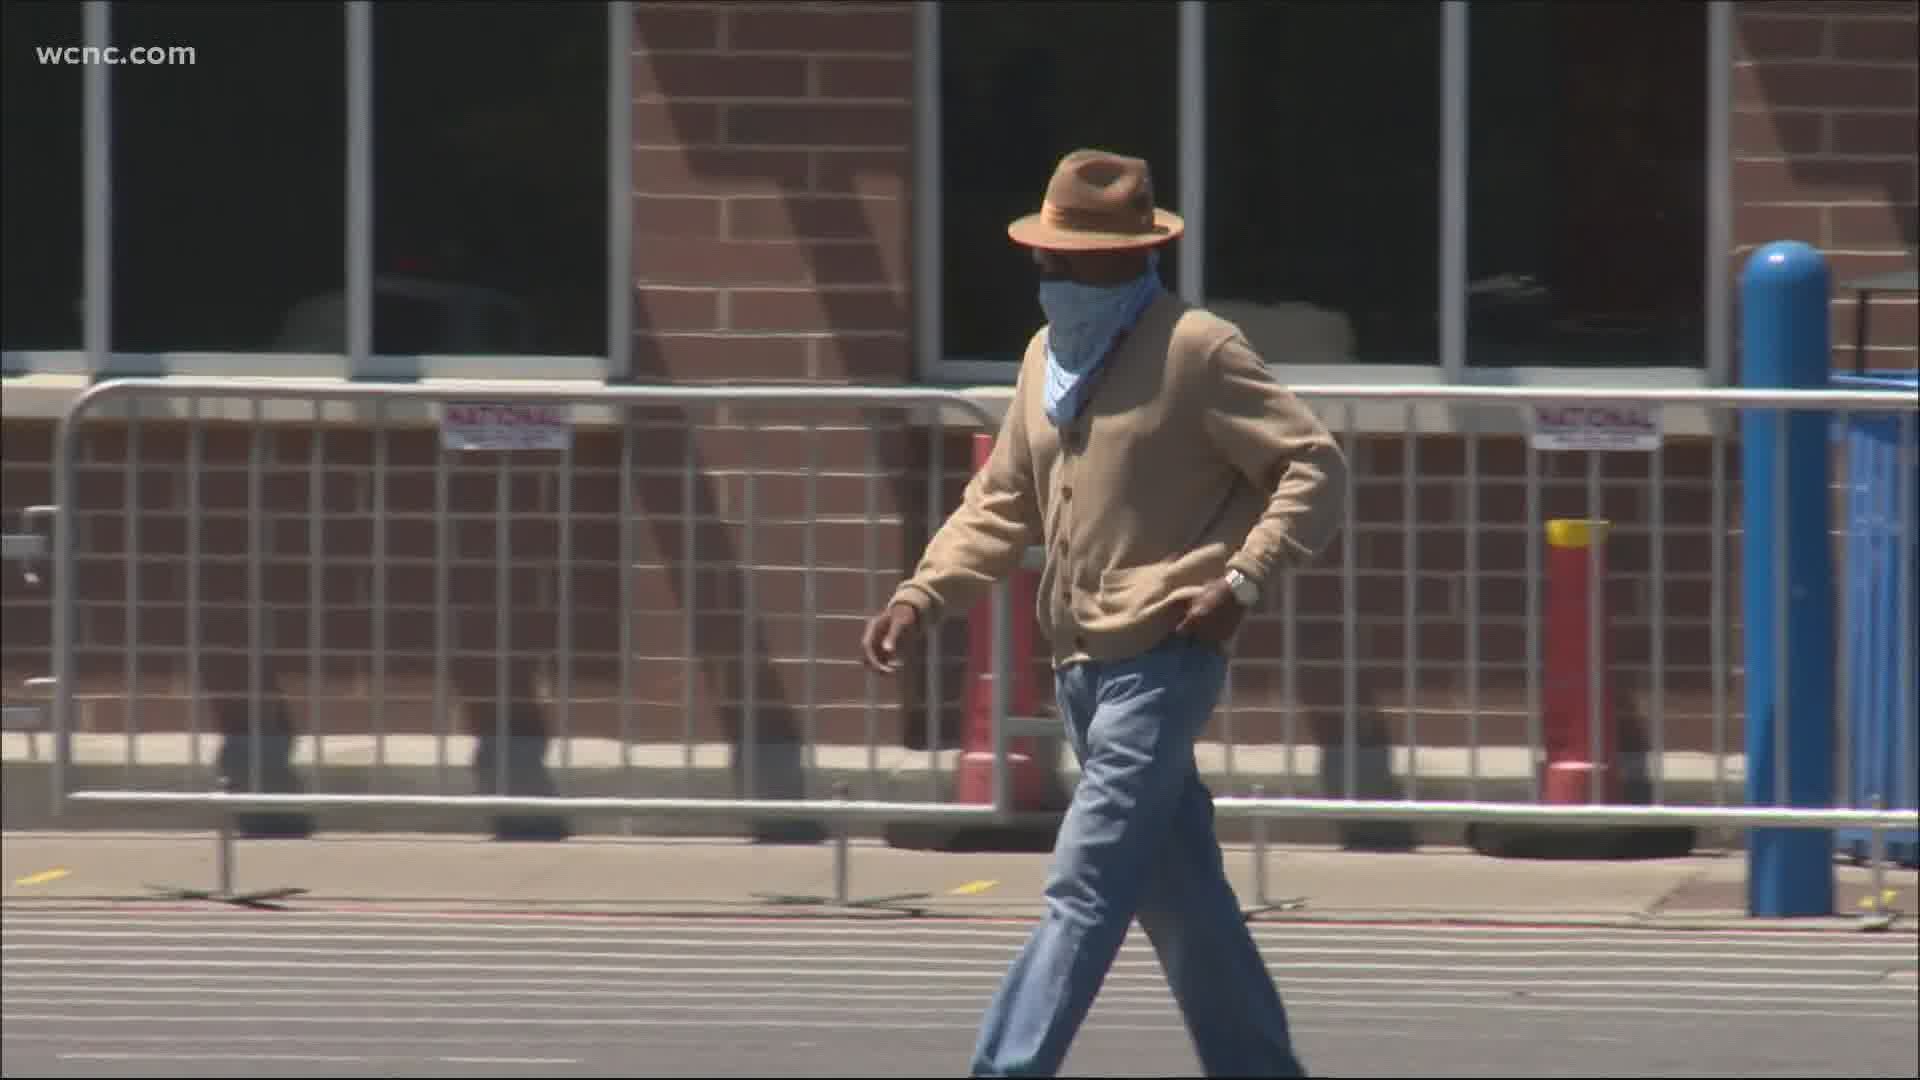 CMPD says if you feel harassed while wearing a mask, you should call them instead of engaging.